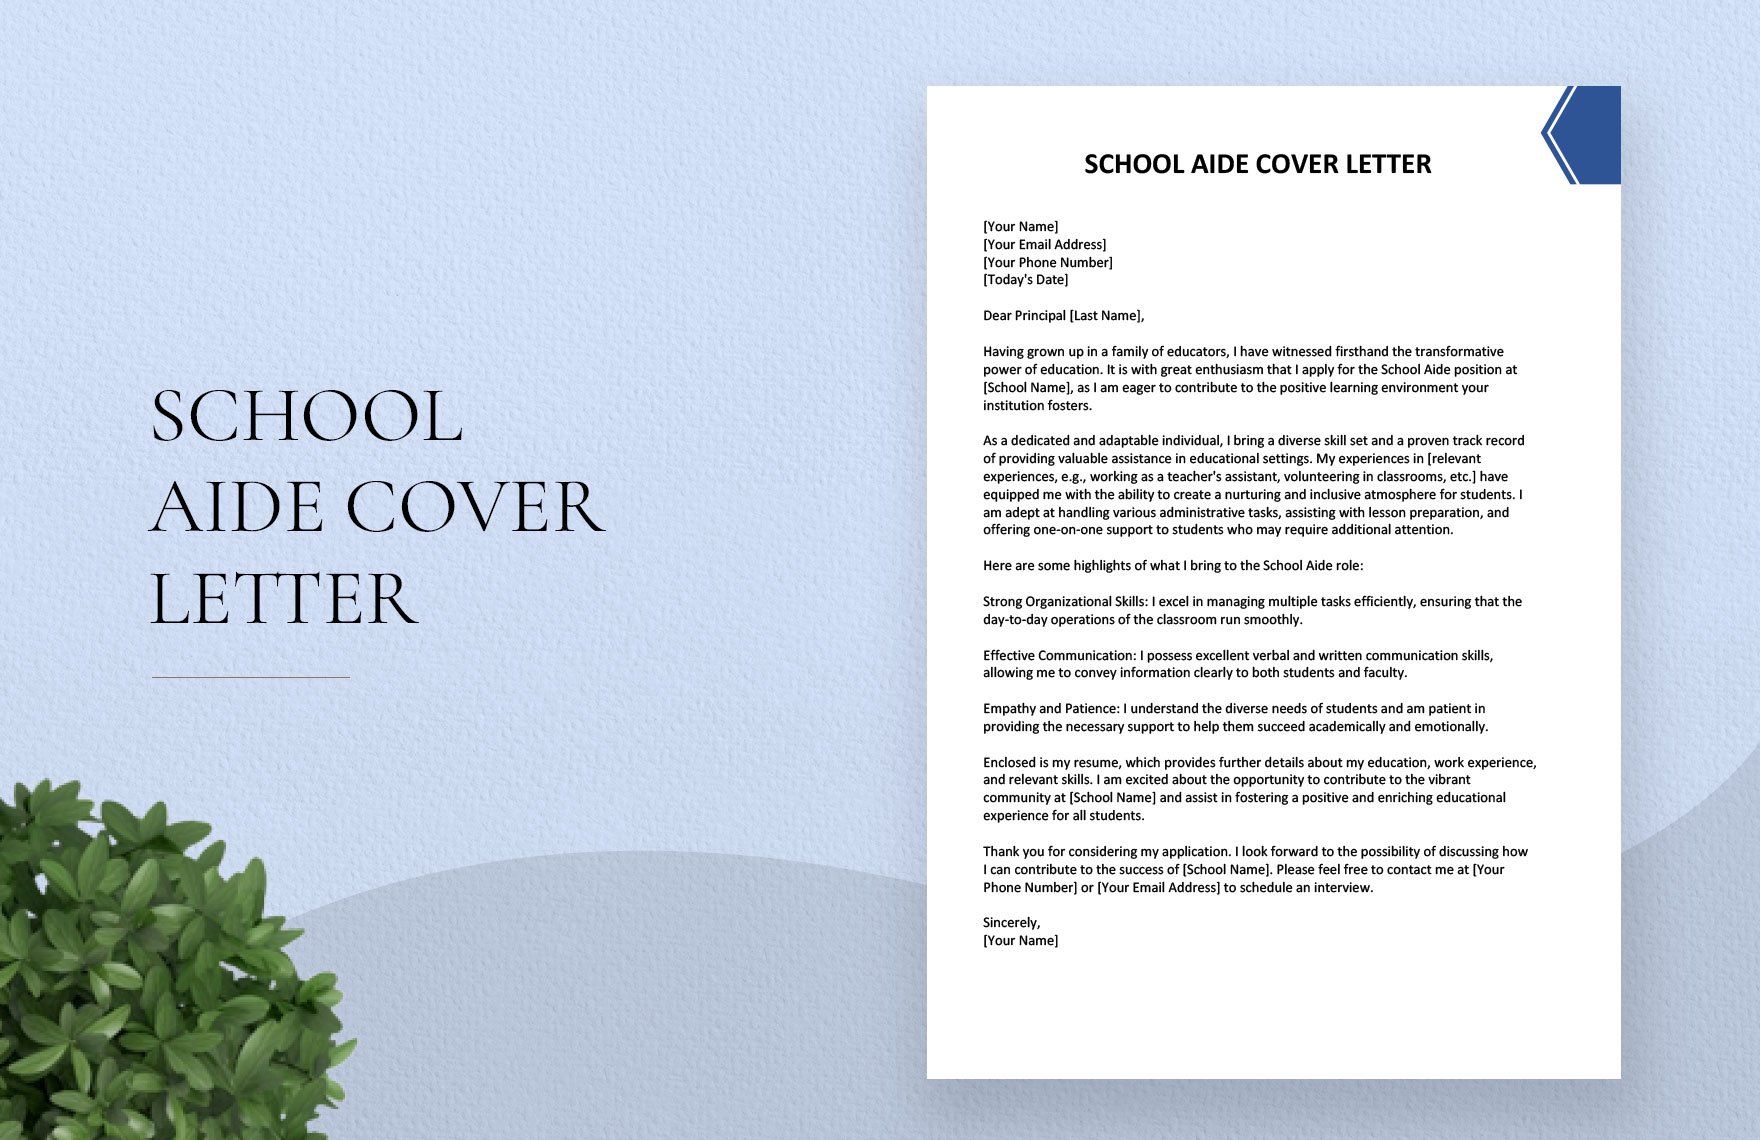 School Aide Cover Letter